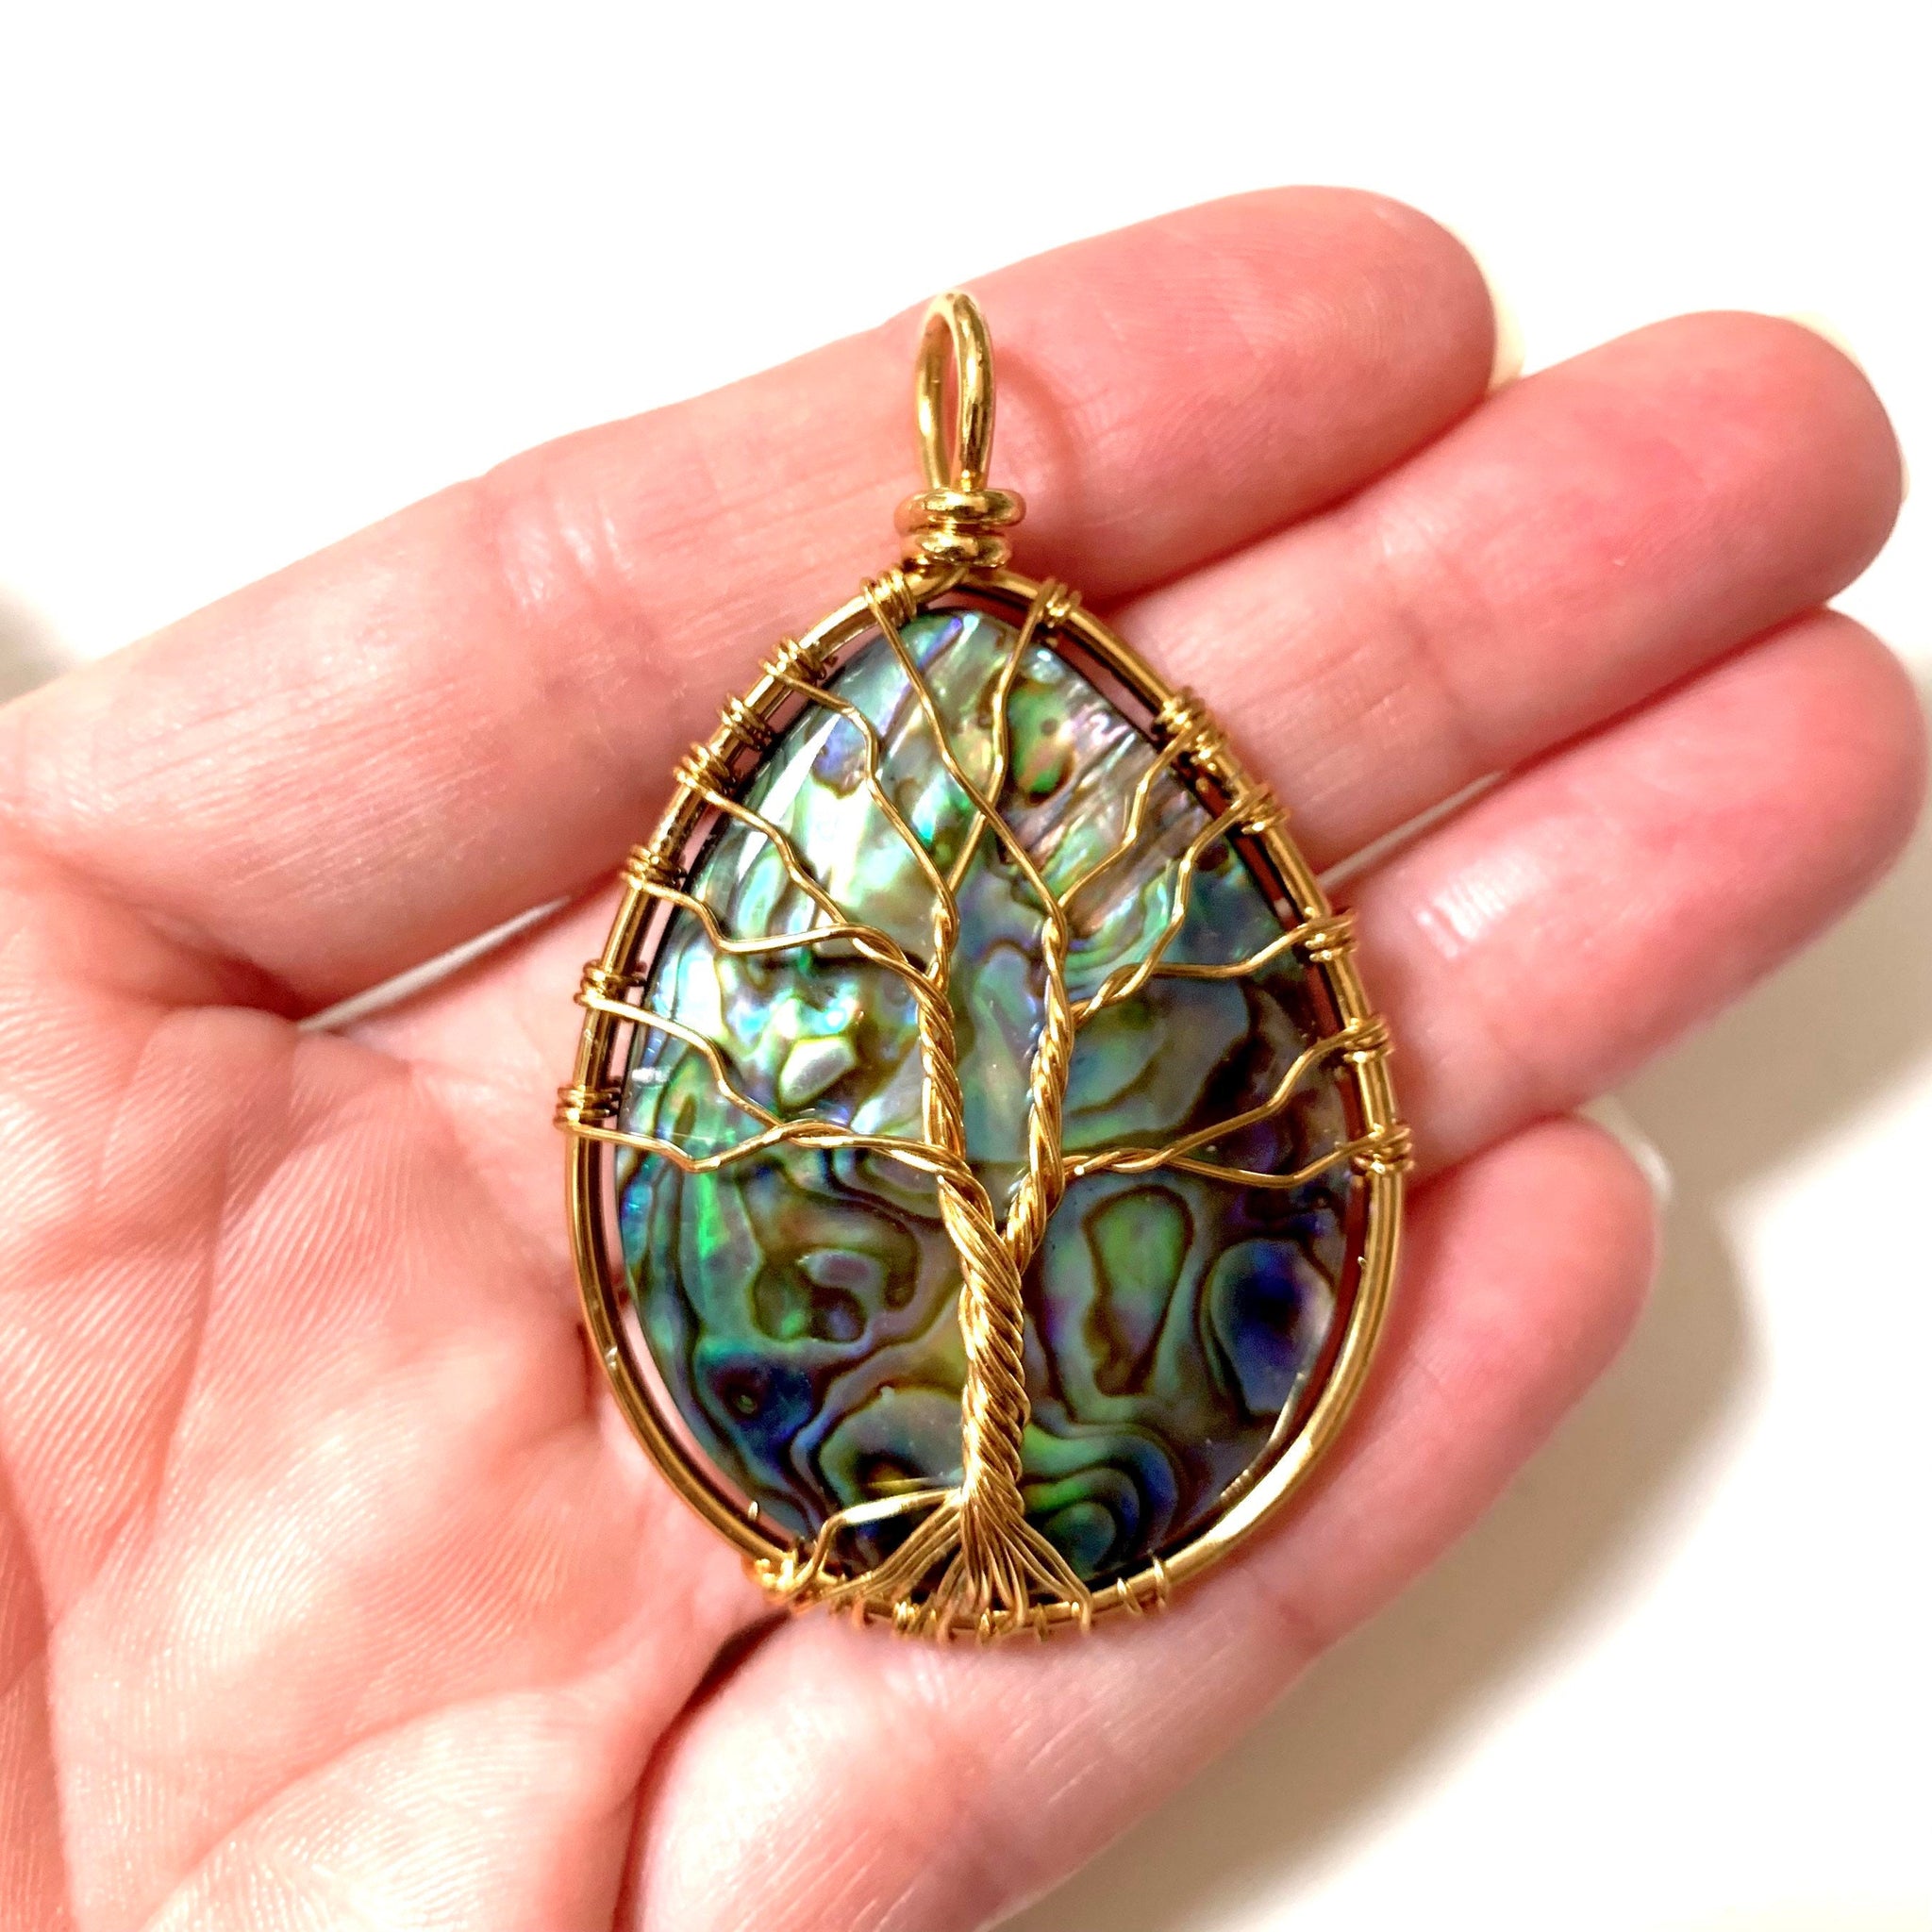 Handmade Abalone Shell Pendant- Gold Wire Wrapped Tree of Life Pendant